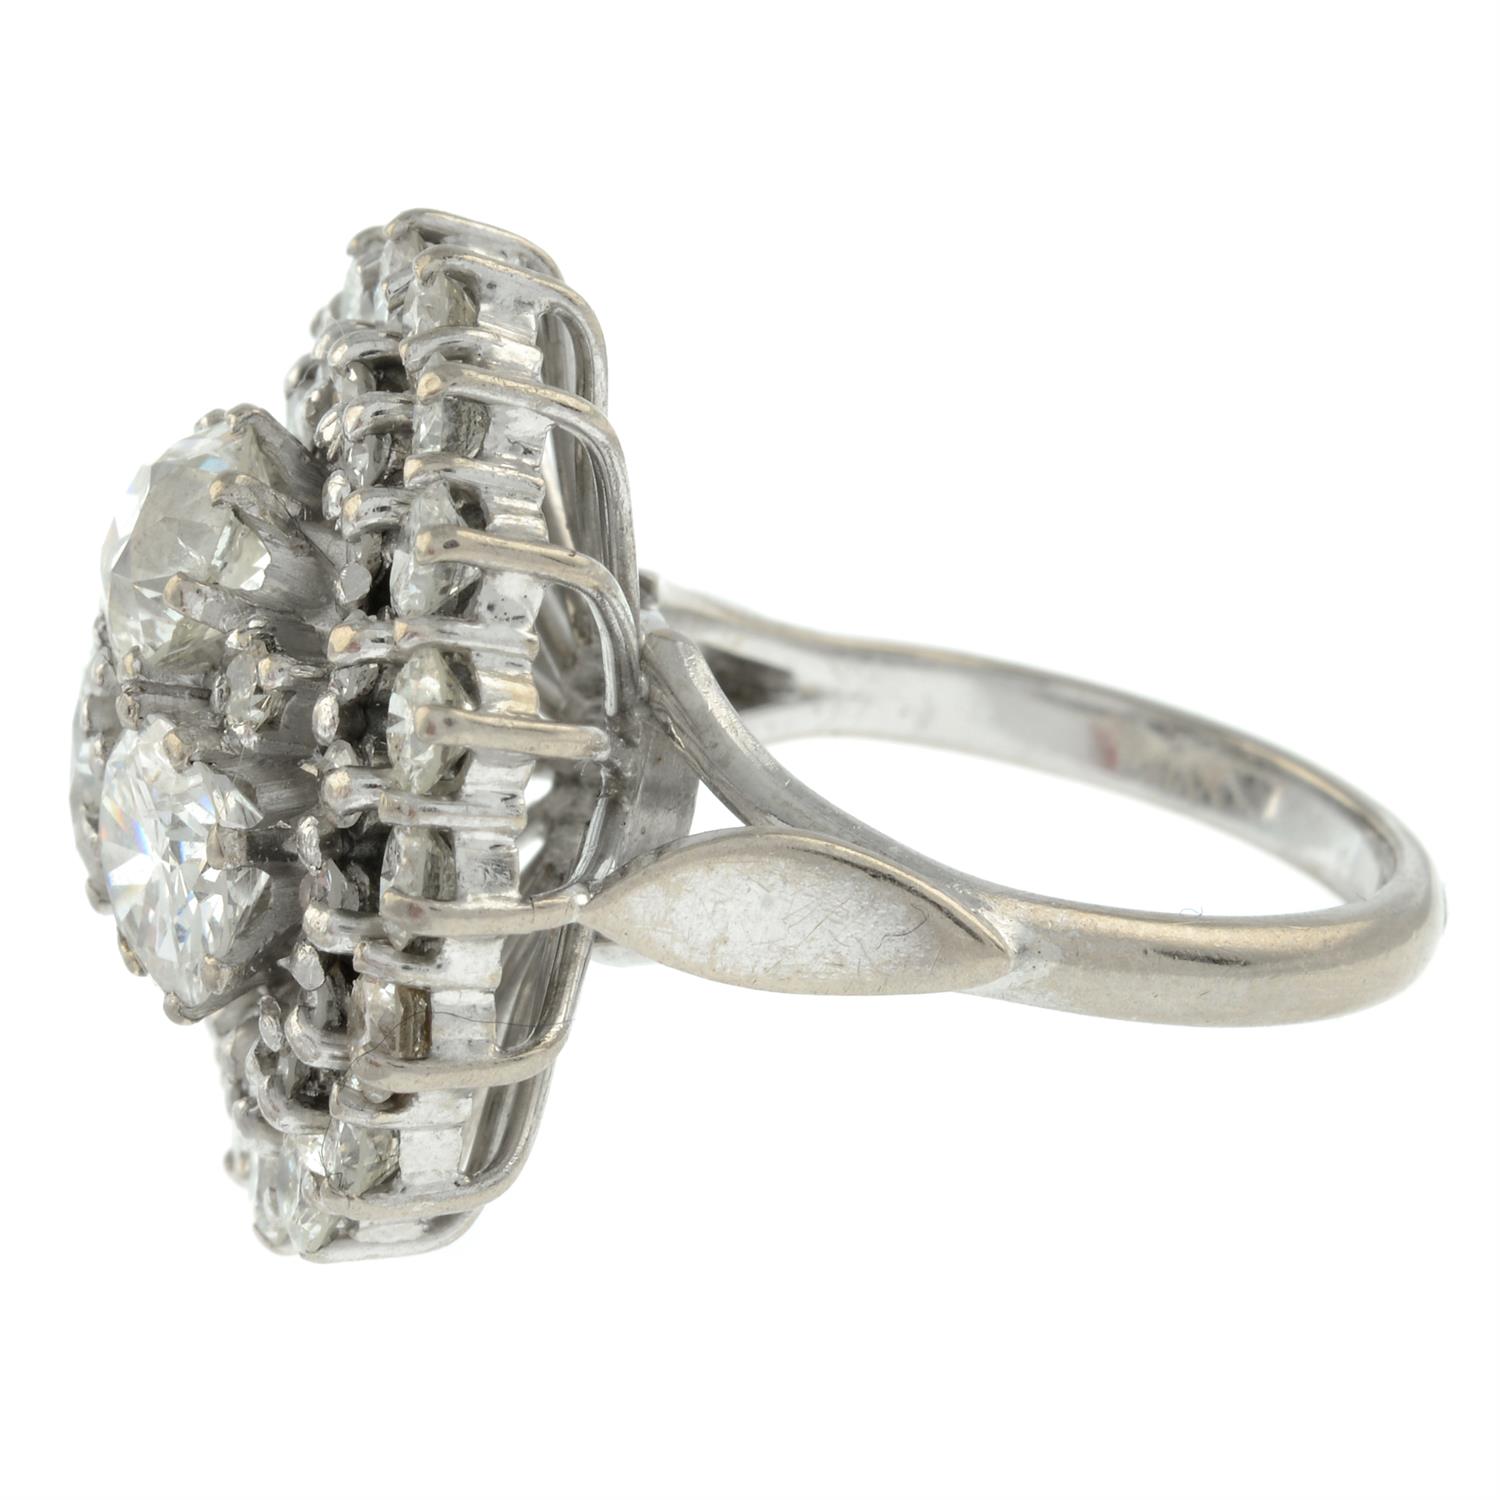 Diamond cluster ring - Image 3 of 5